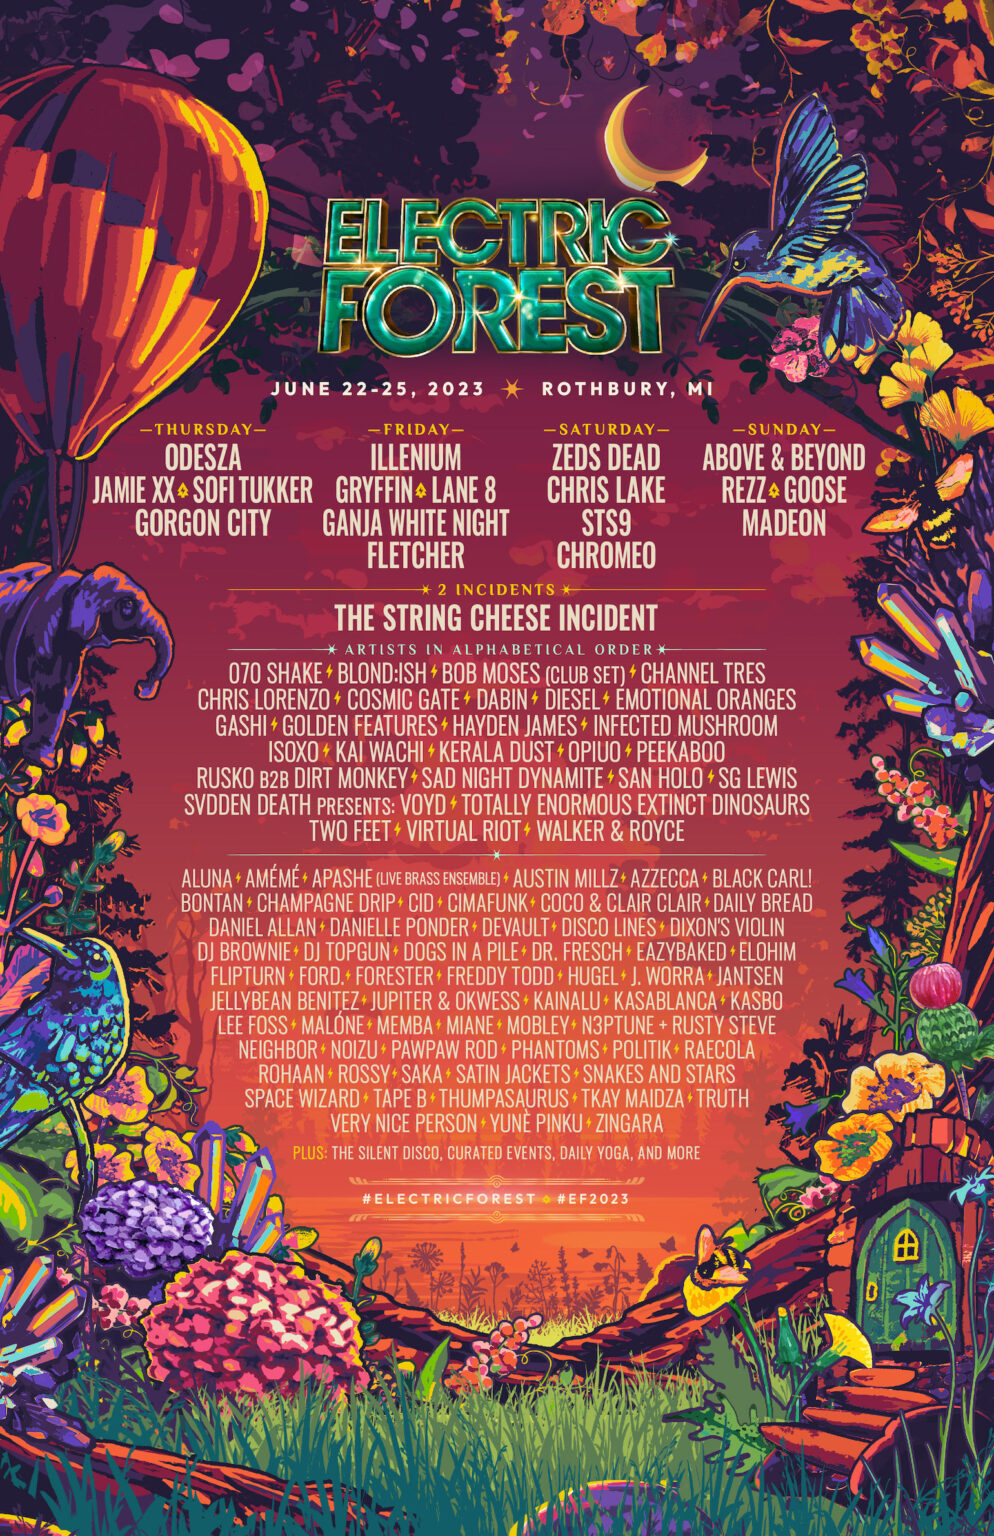 Festival Electric Forest Rothbury, Mich. tickets and lineup on Jun